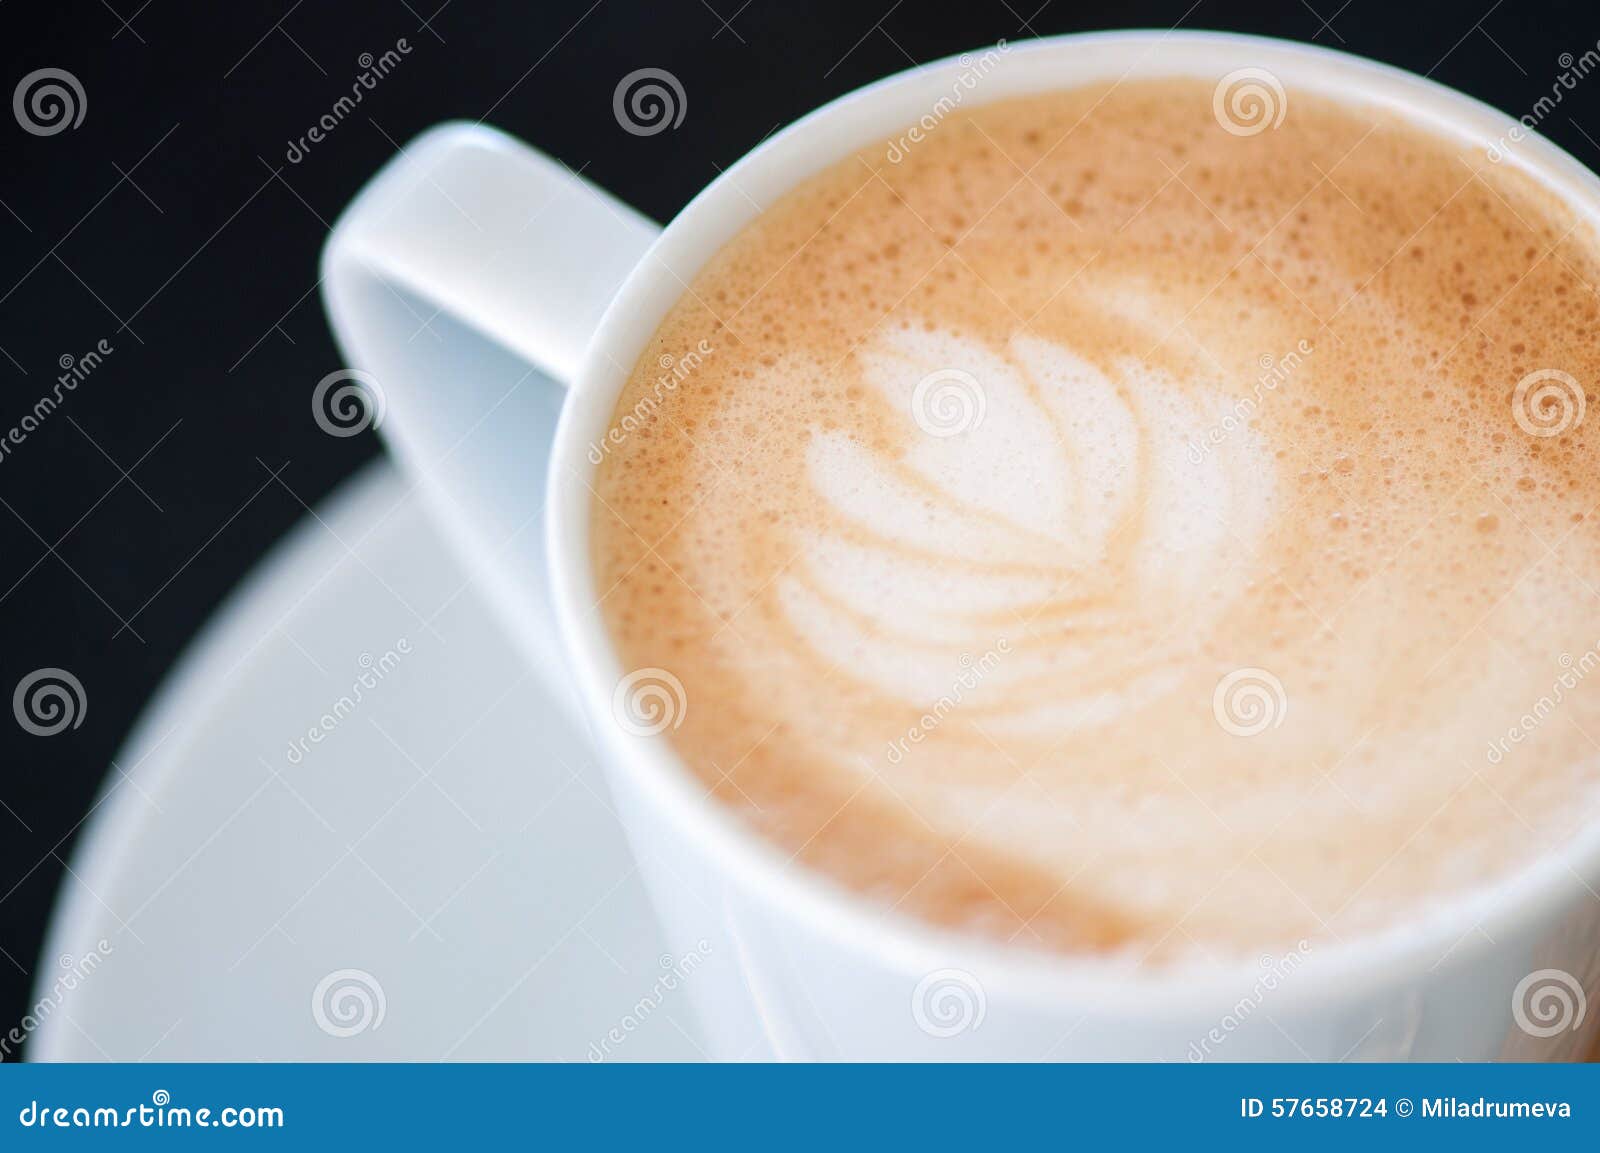 cappuchino or latte coffe in a white cup on a dark background